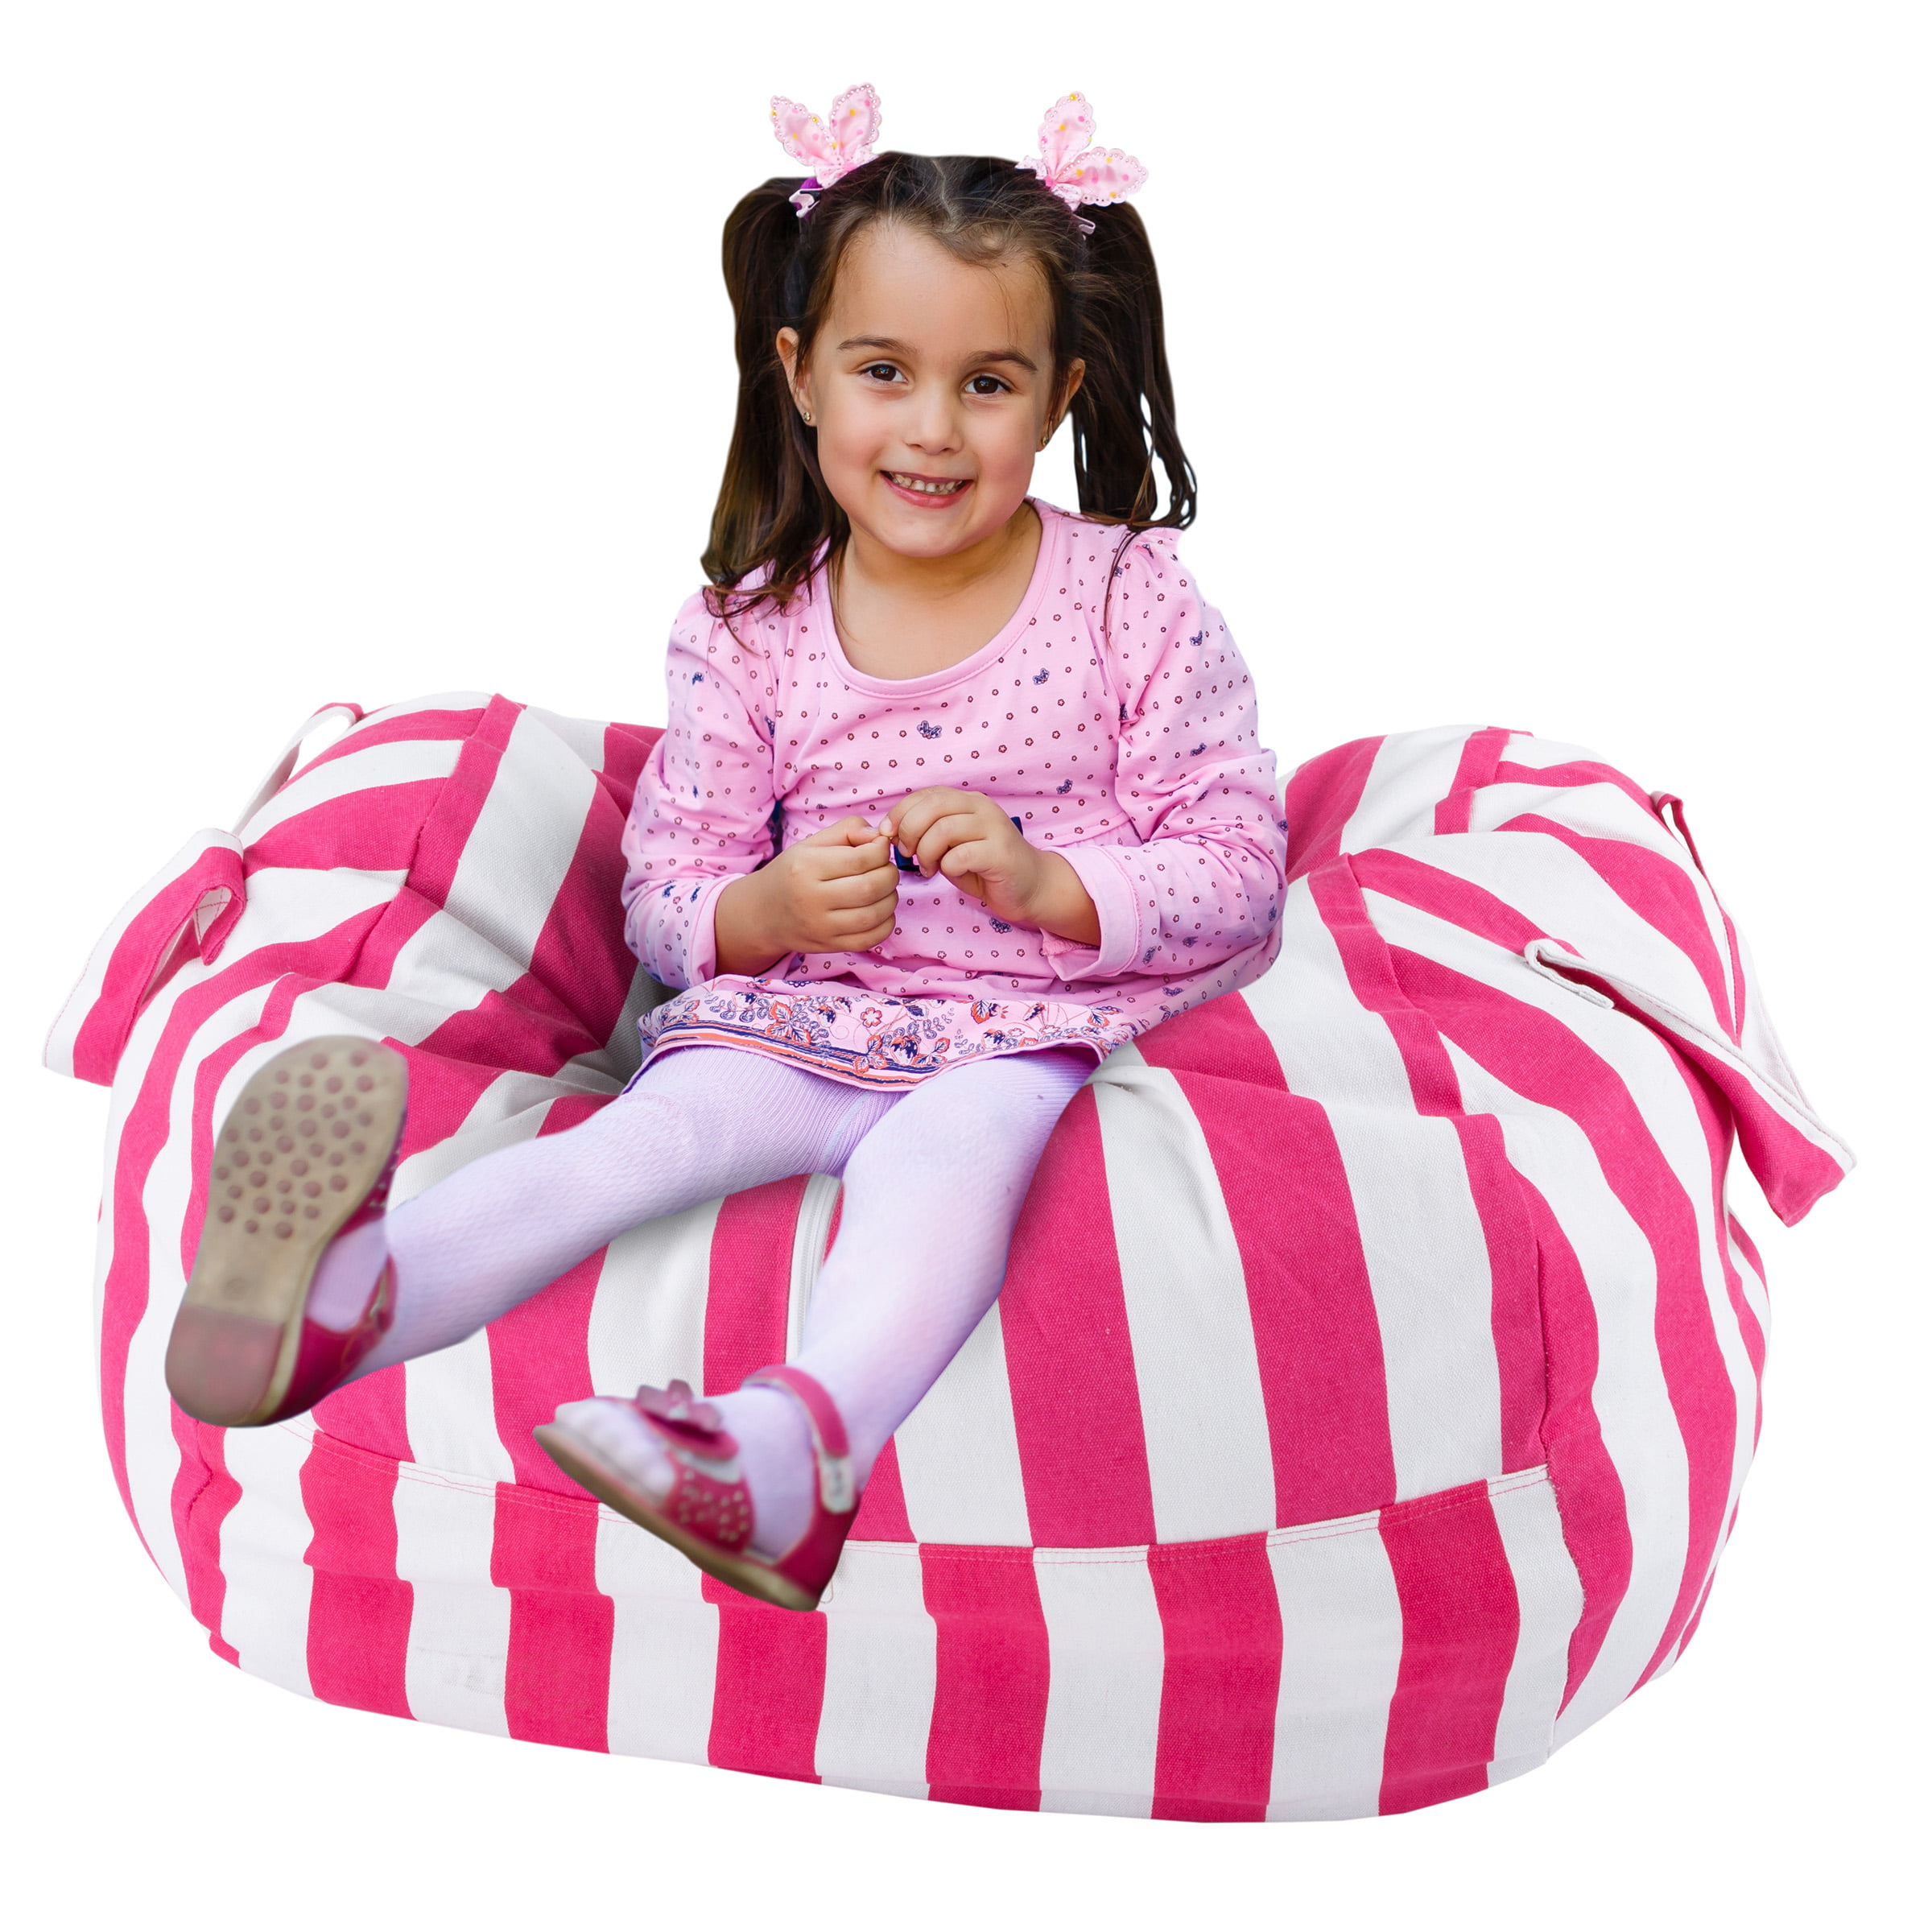 Childrens Bean Bag Chair Cover Kids Tub Cup Seat Play Beanbag Bedroom Soft Toy 